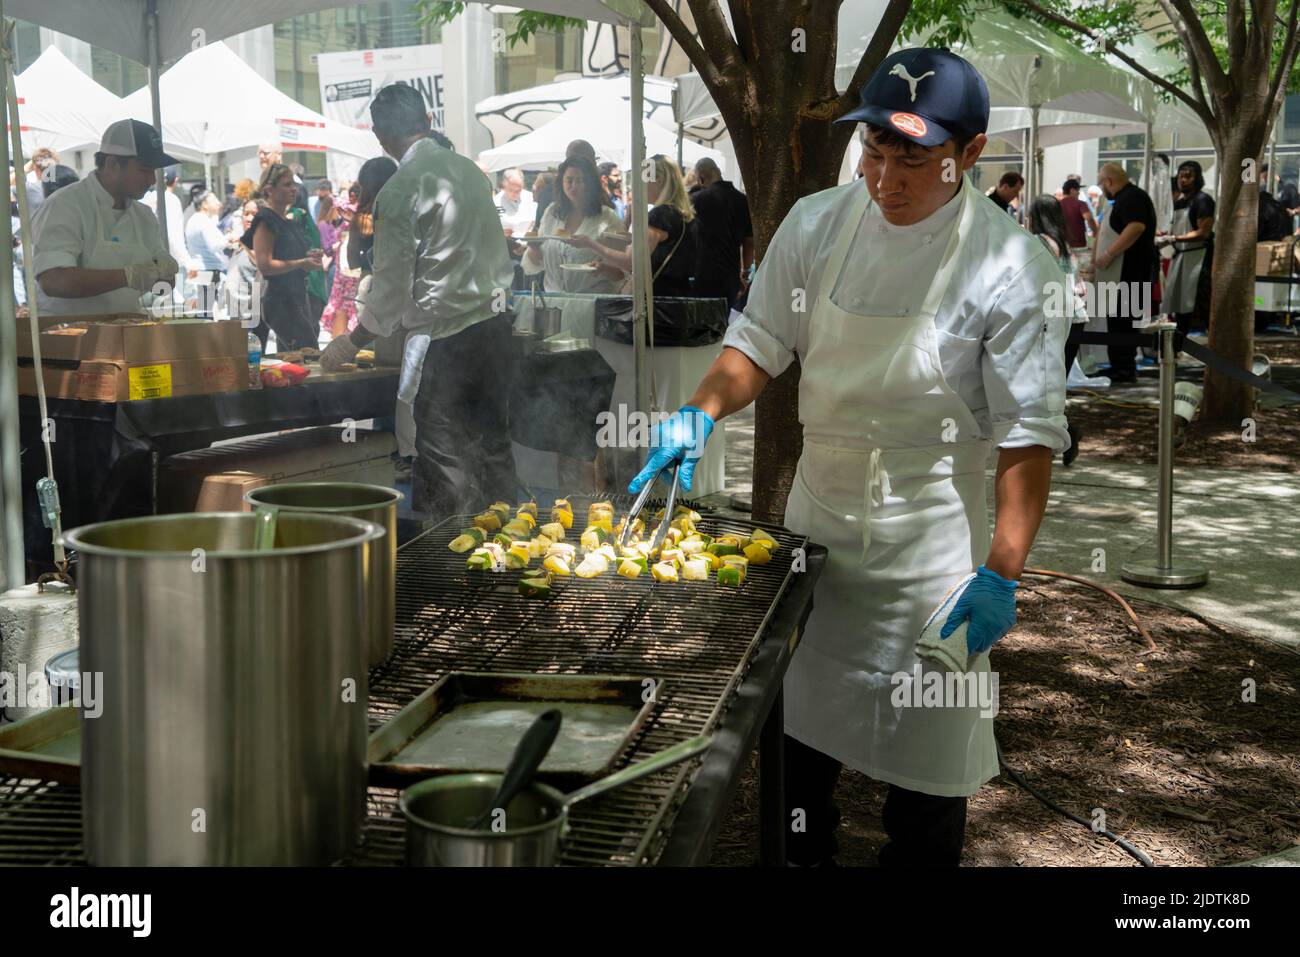 A cook prepared coconut-curry vegetable skewers at Dine Around Downtown, a food festival organized by the Alliance for Downtown New York. Stock Photo